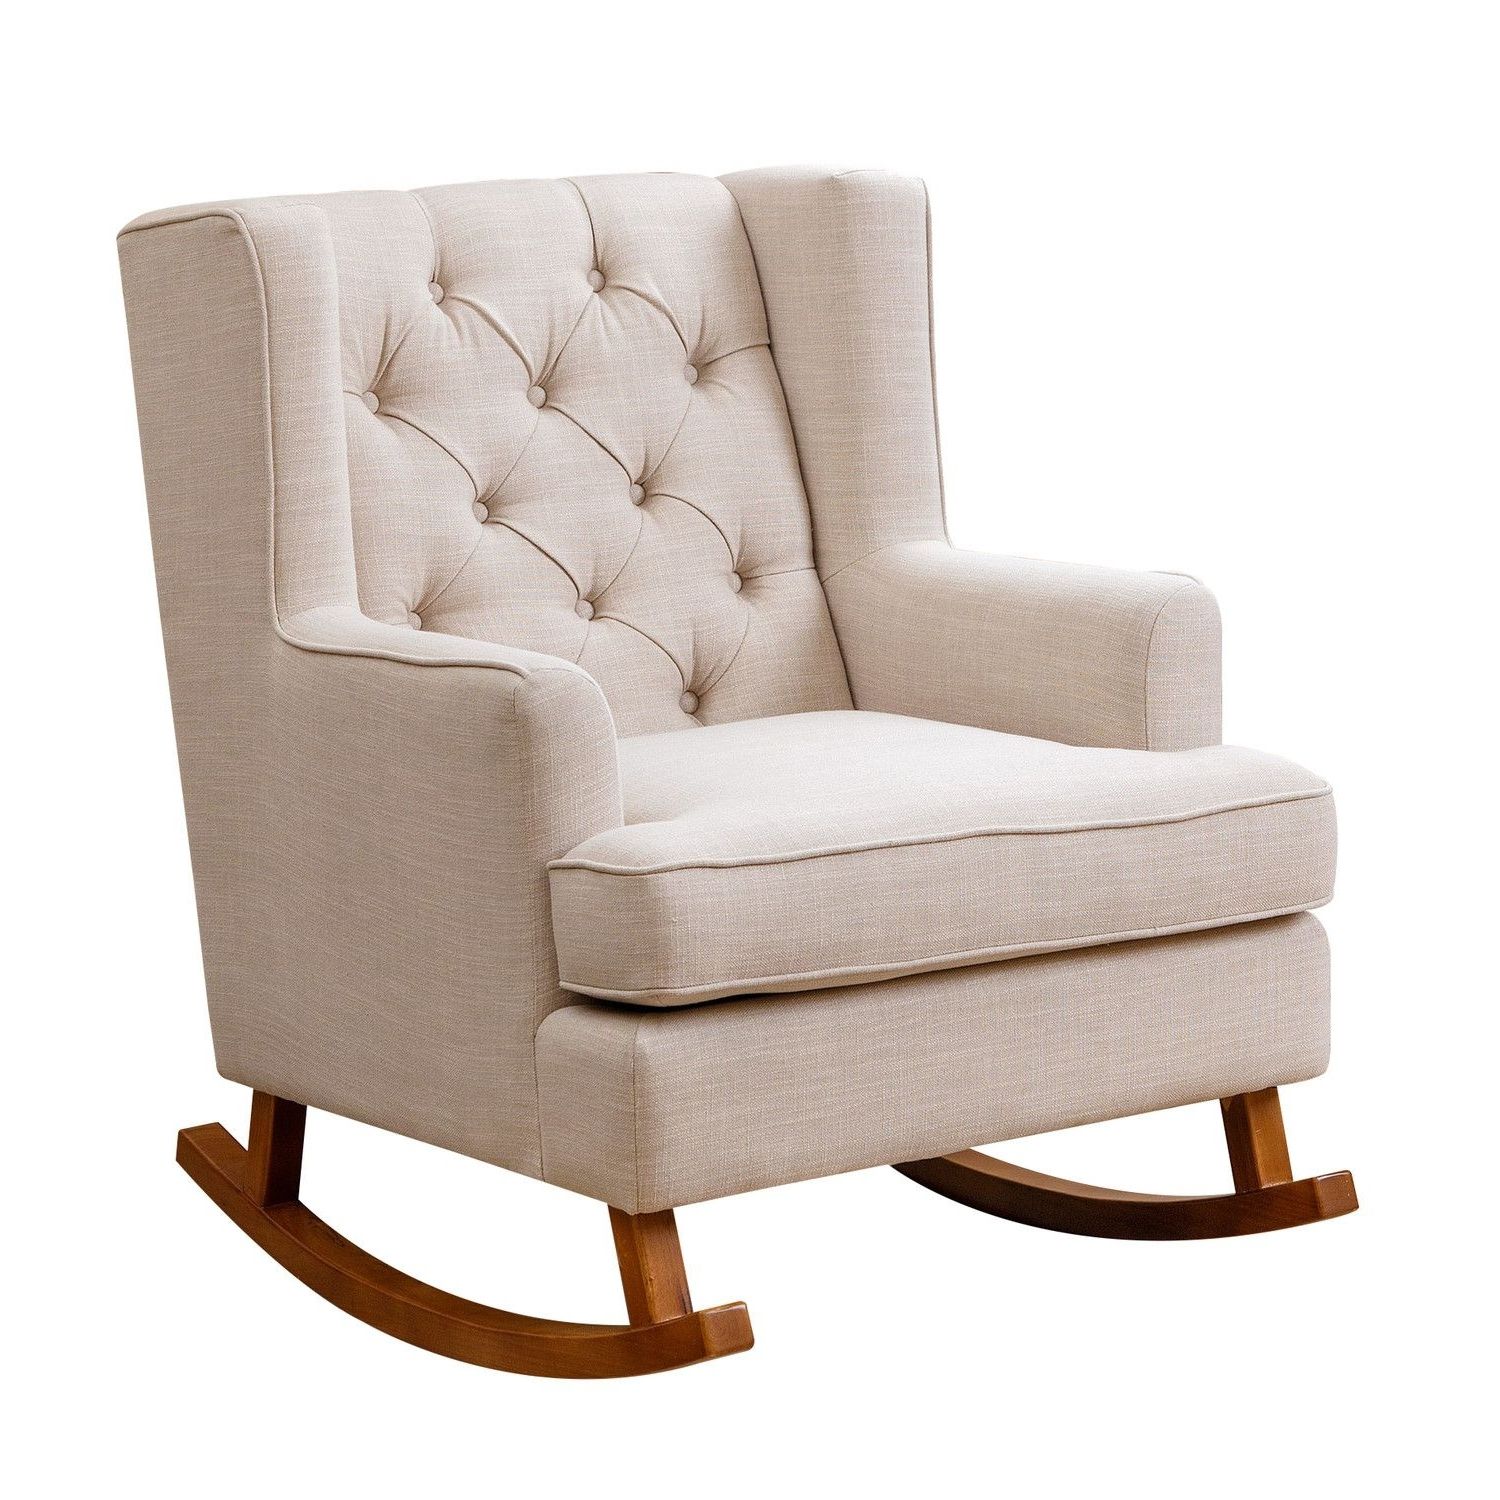 Well Known Rocking Chairs At Wayfair With Regard To You'll Love The Rocking Chair At Wayfair – Great Deals On All Baby (Photo 1 of 15)